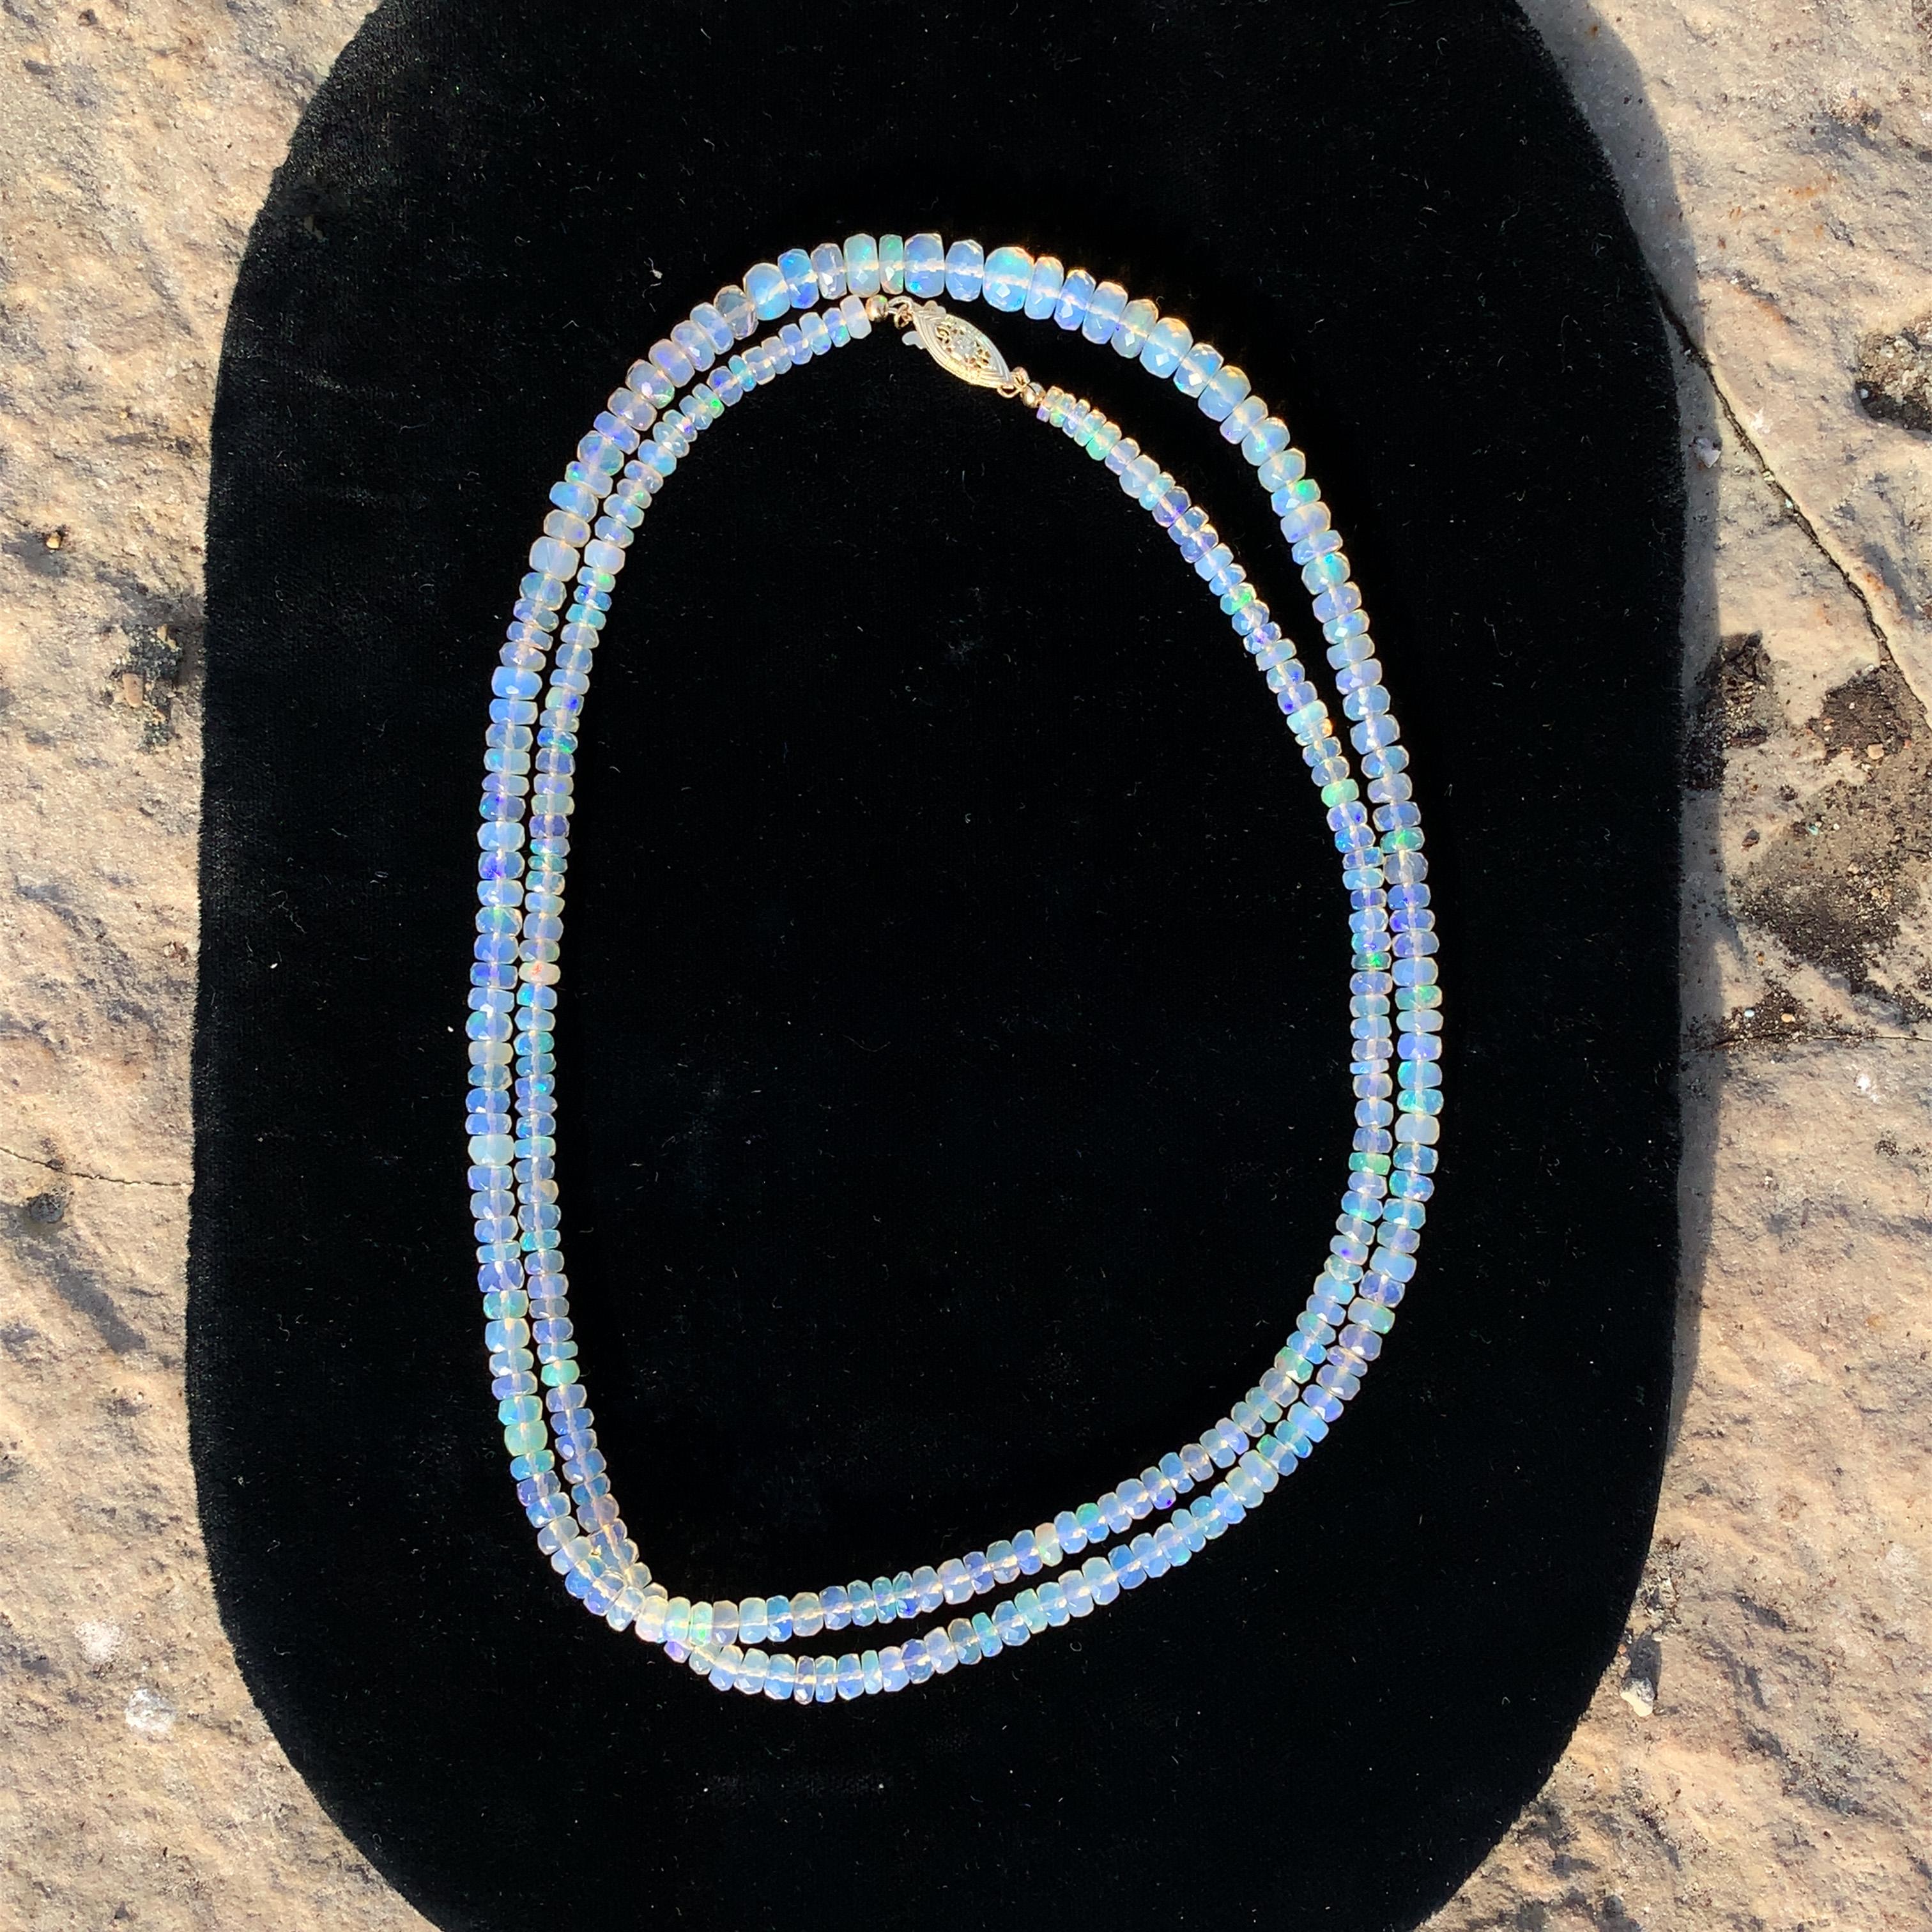 A long graduated strand of natural earth mined Welo opal beads weighing 120 carats total. The necklace measures 33.5